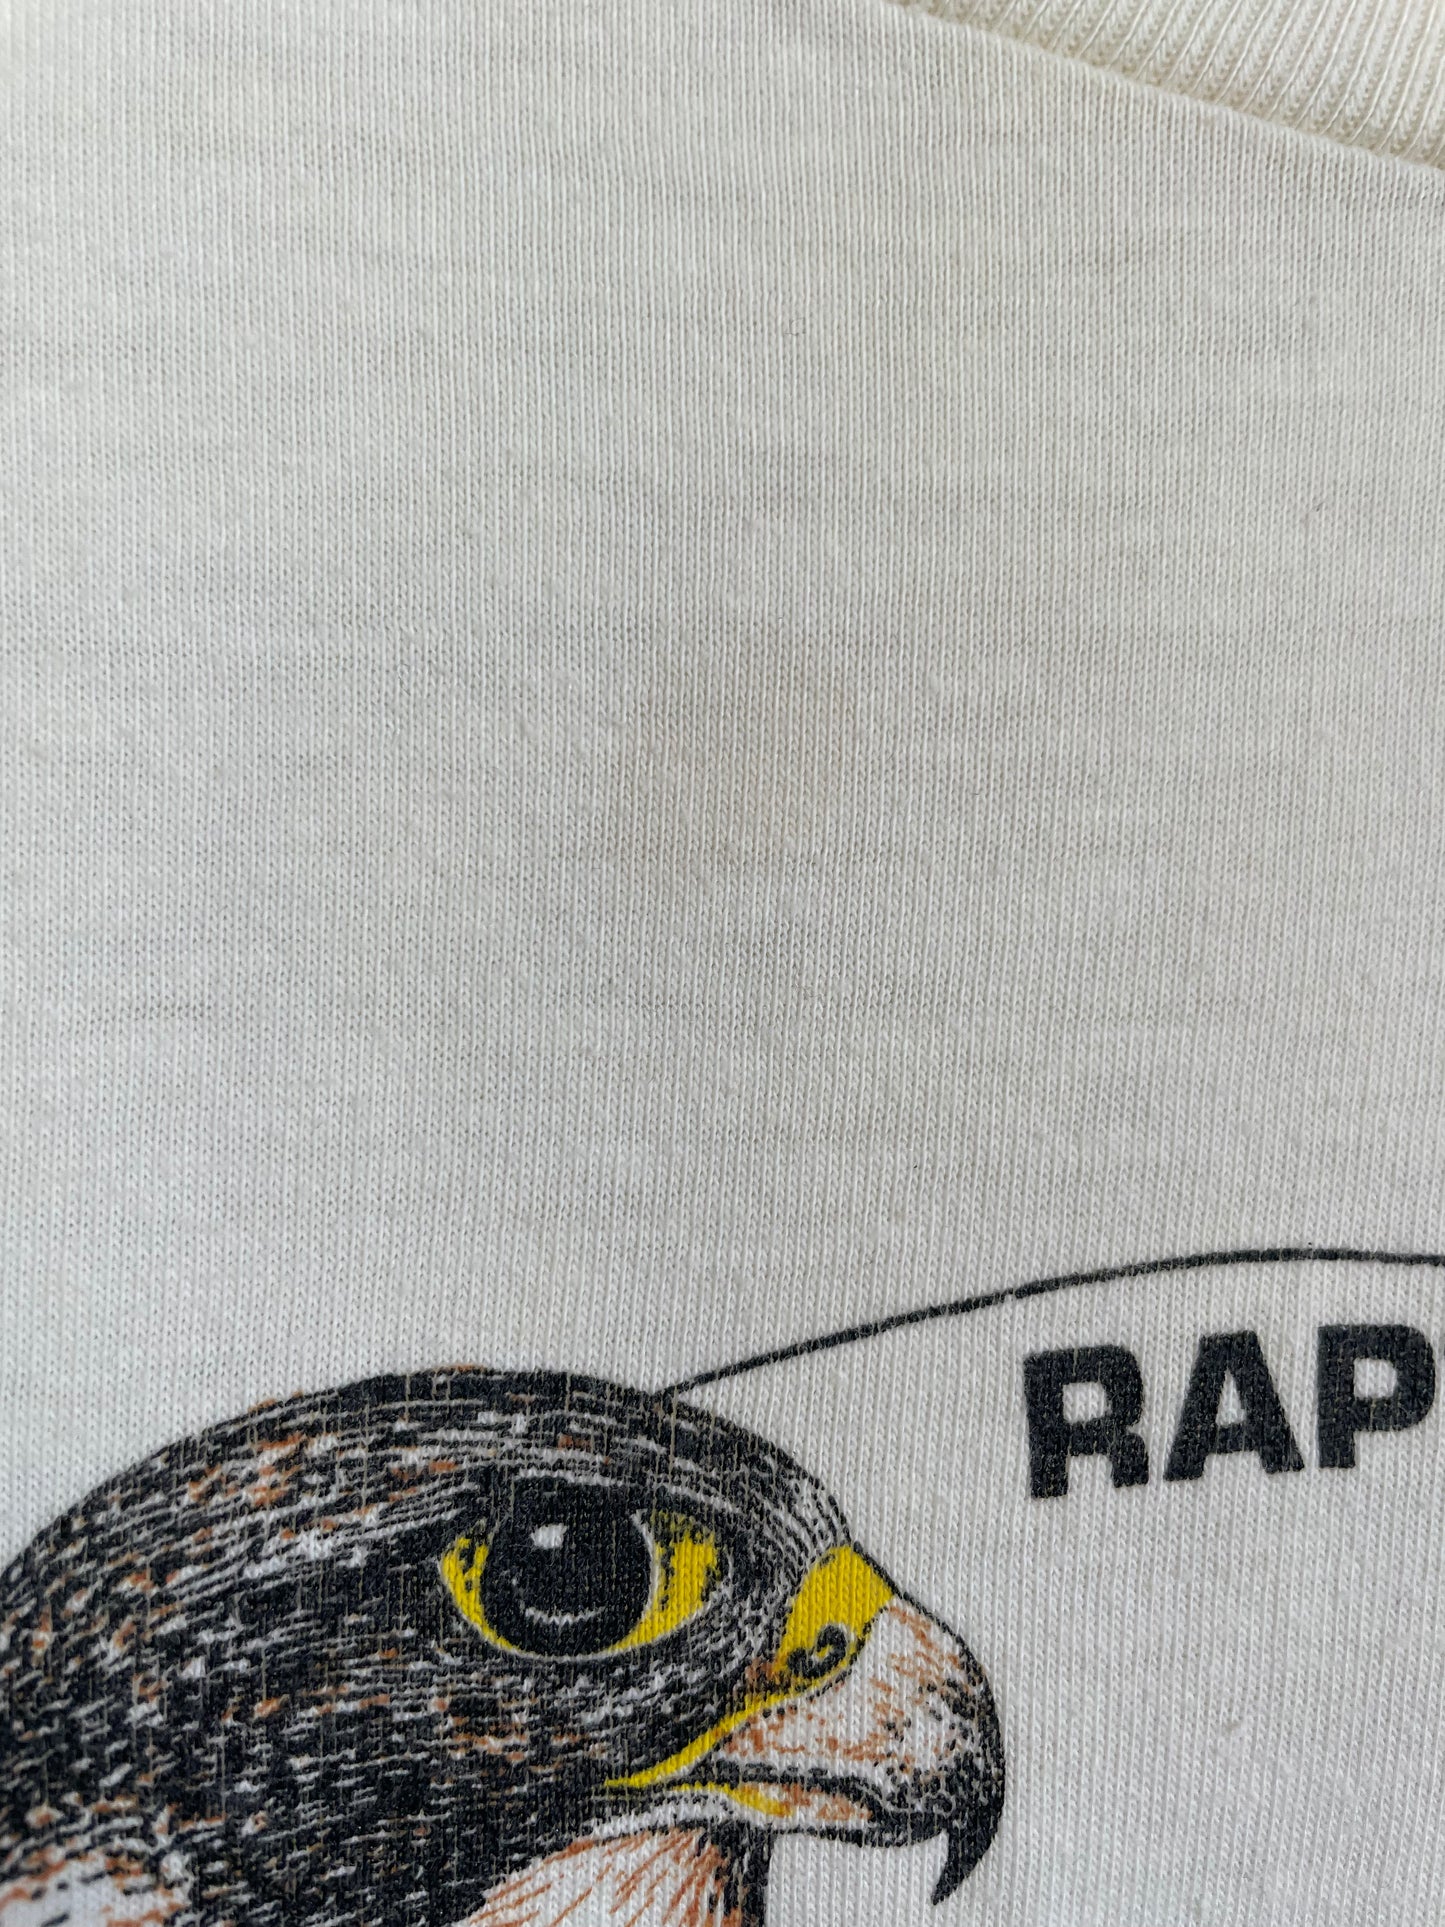 80s Raptor Rehabilitation And Propagation Project Tee